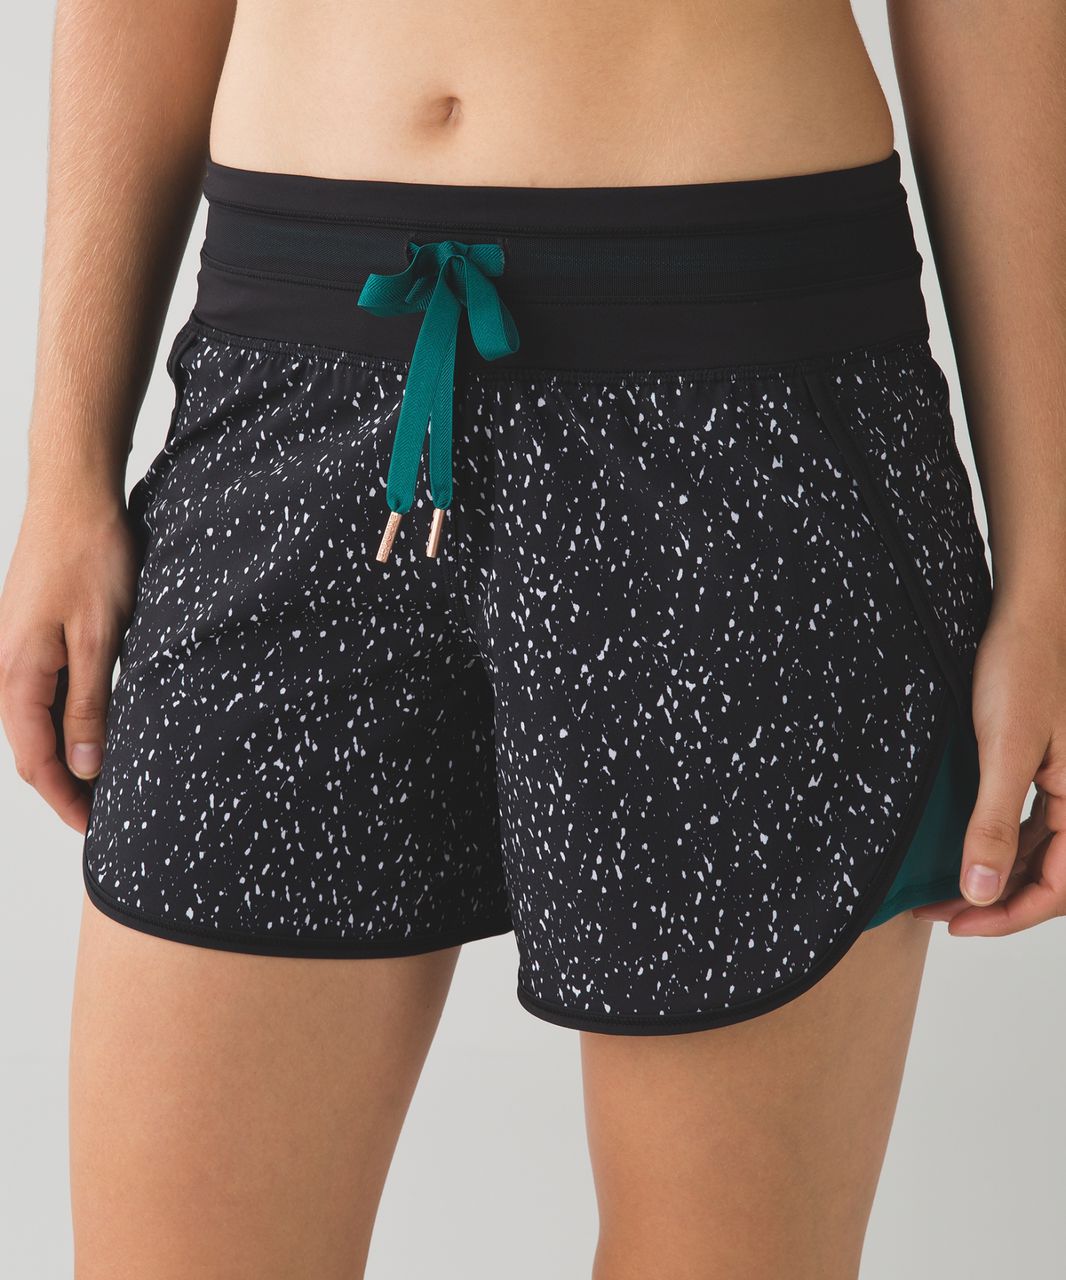 Lululemon Kanto Catch Me Short - Butterfly Texture Black White / Forage Teal